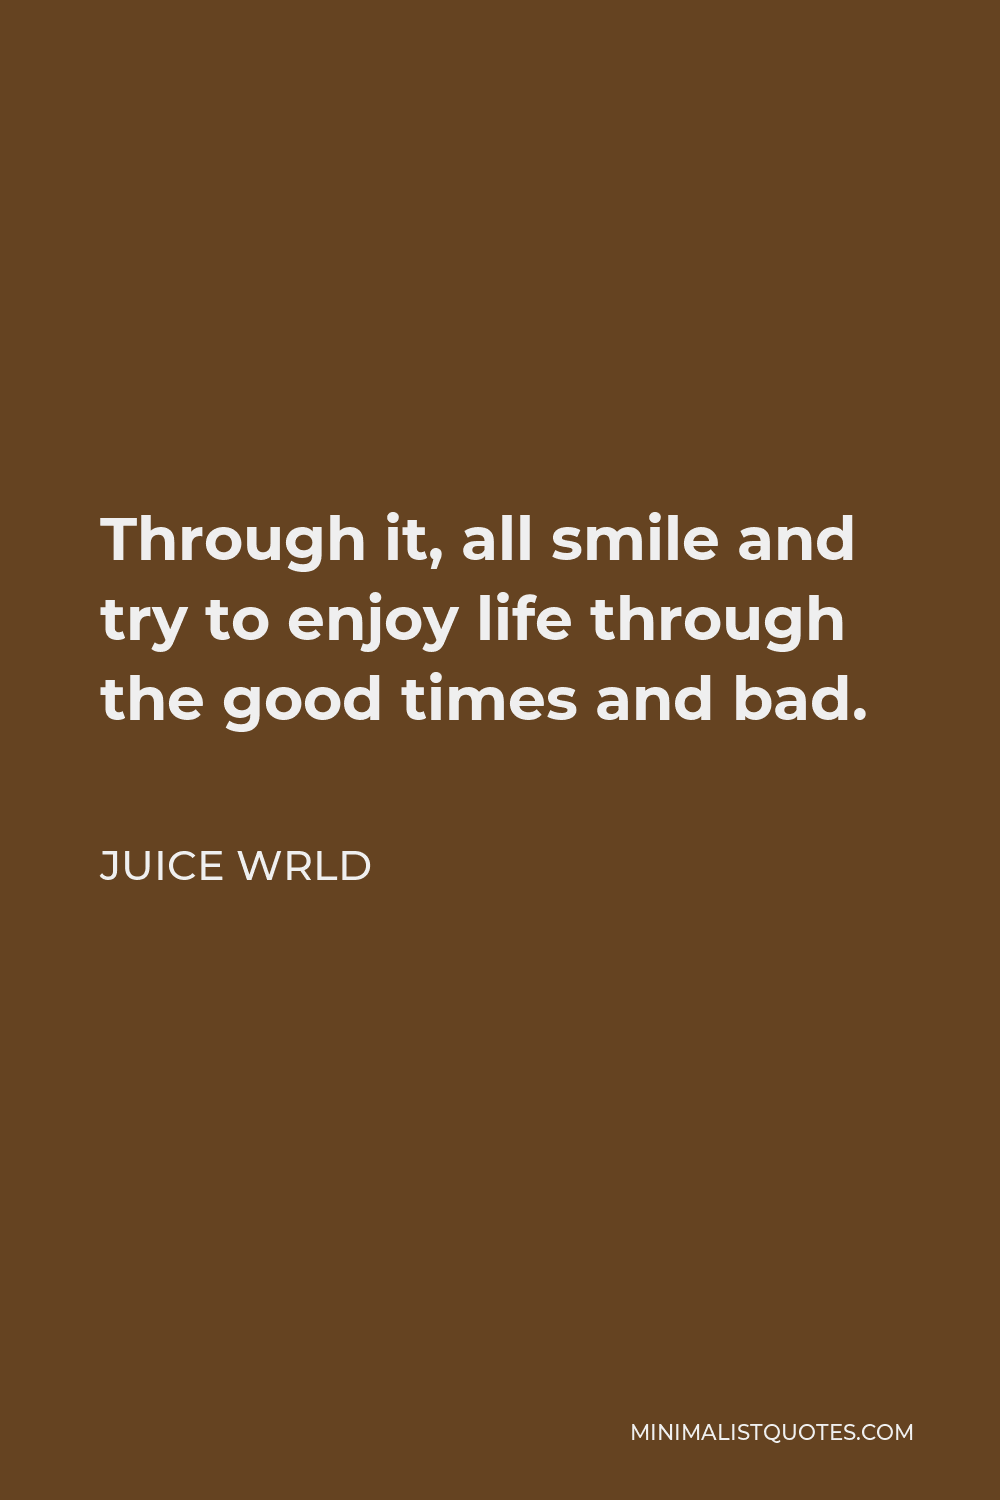 Juice Wrld Quote - Through it, all smile and try to enjoy life through the good times and bad.